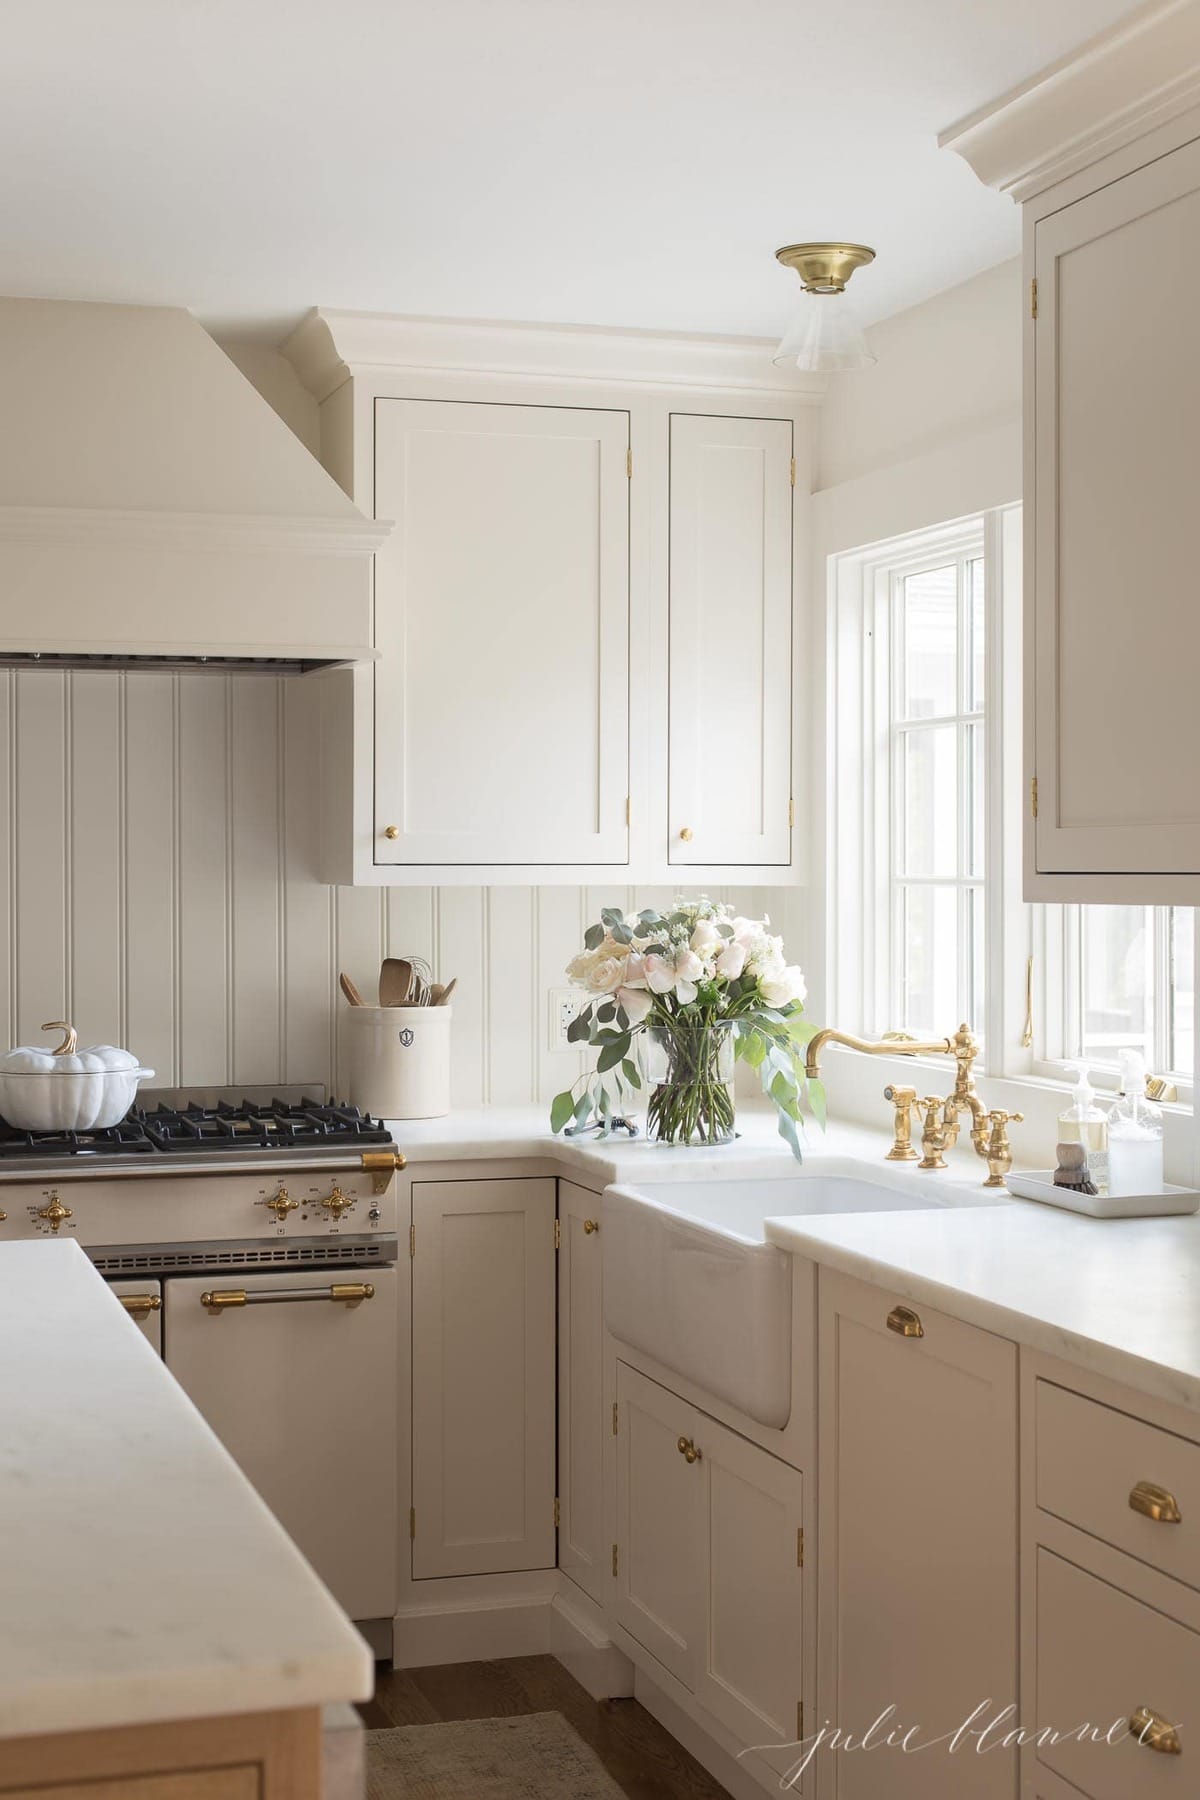 cream cabinets with brass hardware flowers, utensils in a crock and marble counters